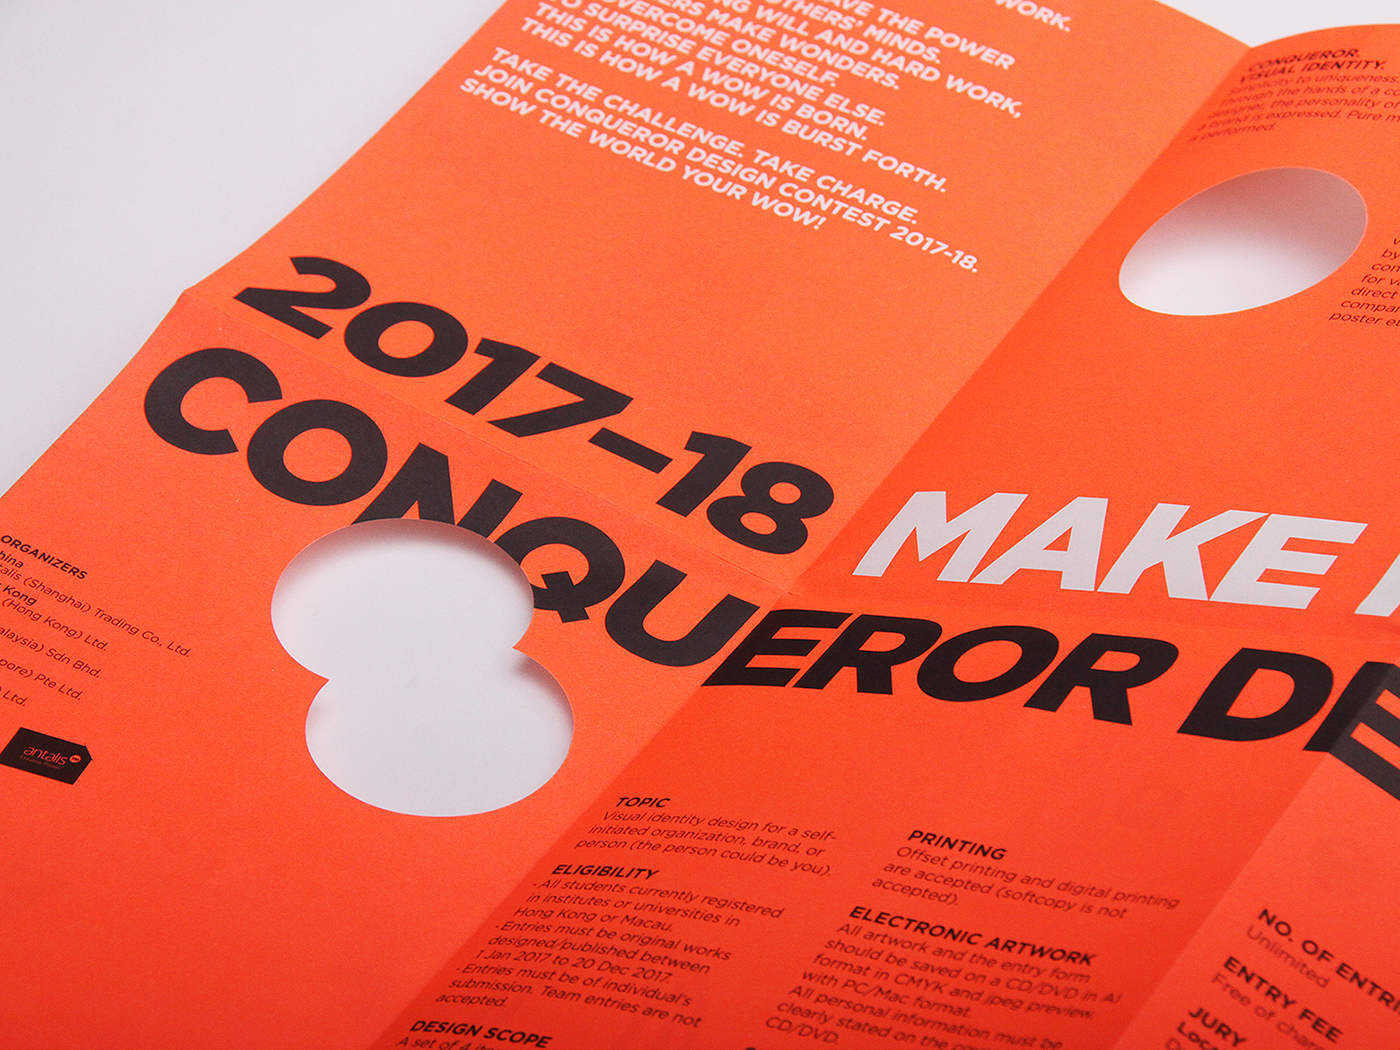 Conqueror design contest wow objects typography   Fun antalis paper Students